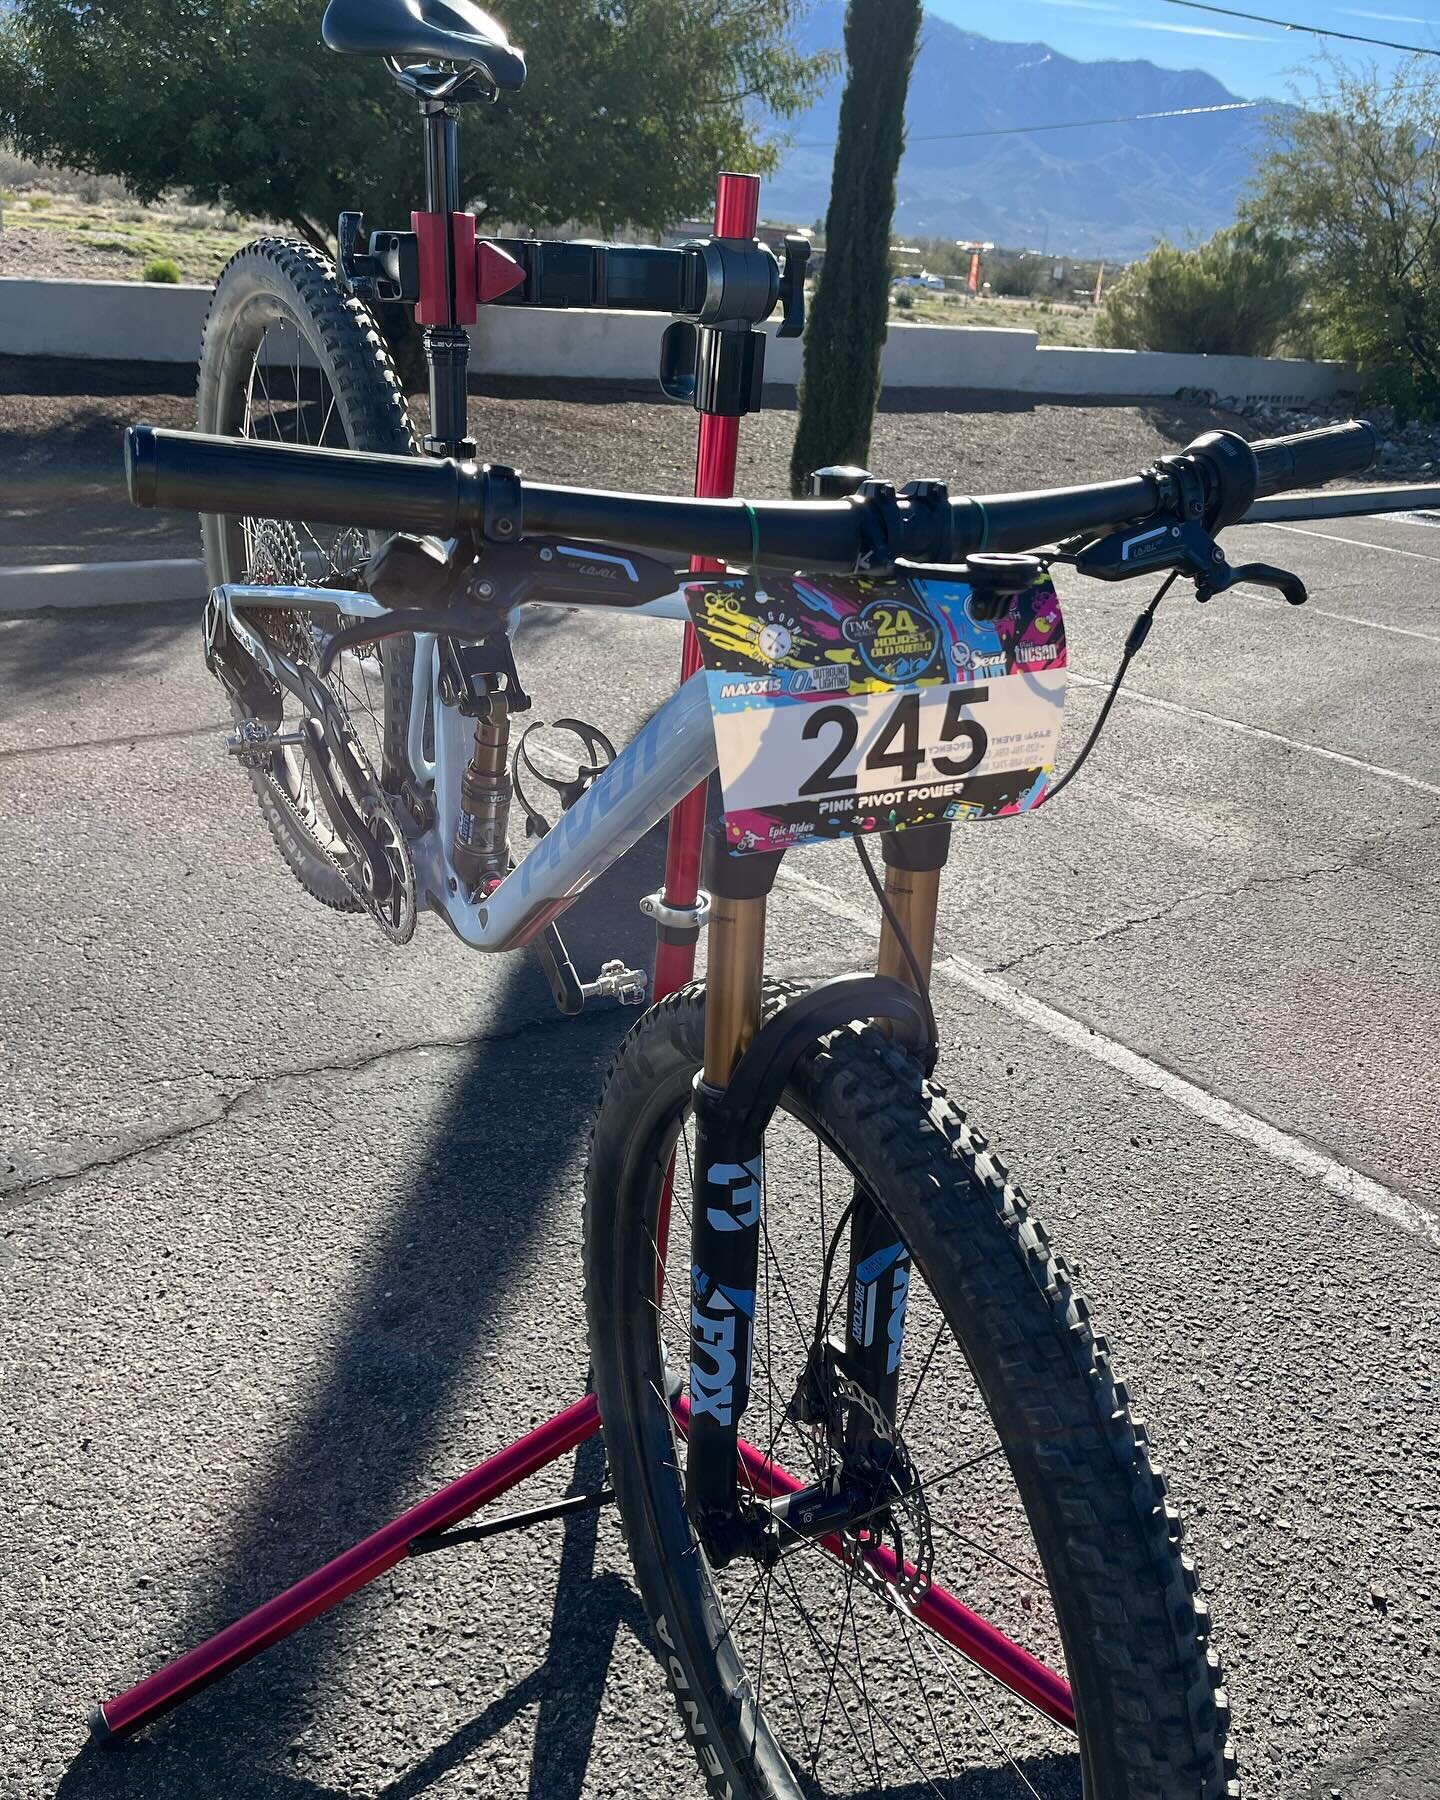 The morning after @epicrides #24hop . Time to prep @timaripruis Pivot Mach 4 SL so she and @the_z_pack can go spin their legs out. The pics are the before I had done any post race cleaning. Yes, Timari&rsquo;s bike is pretty clean and that is THANKS 